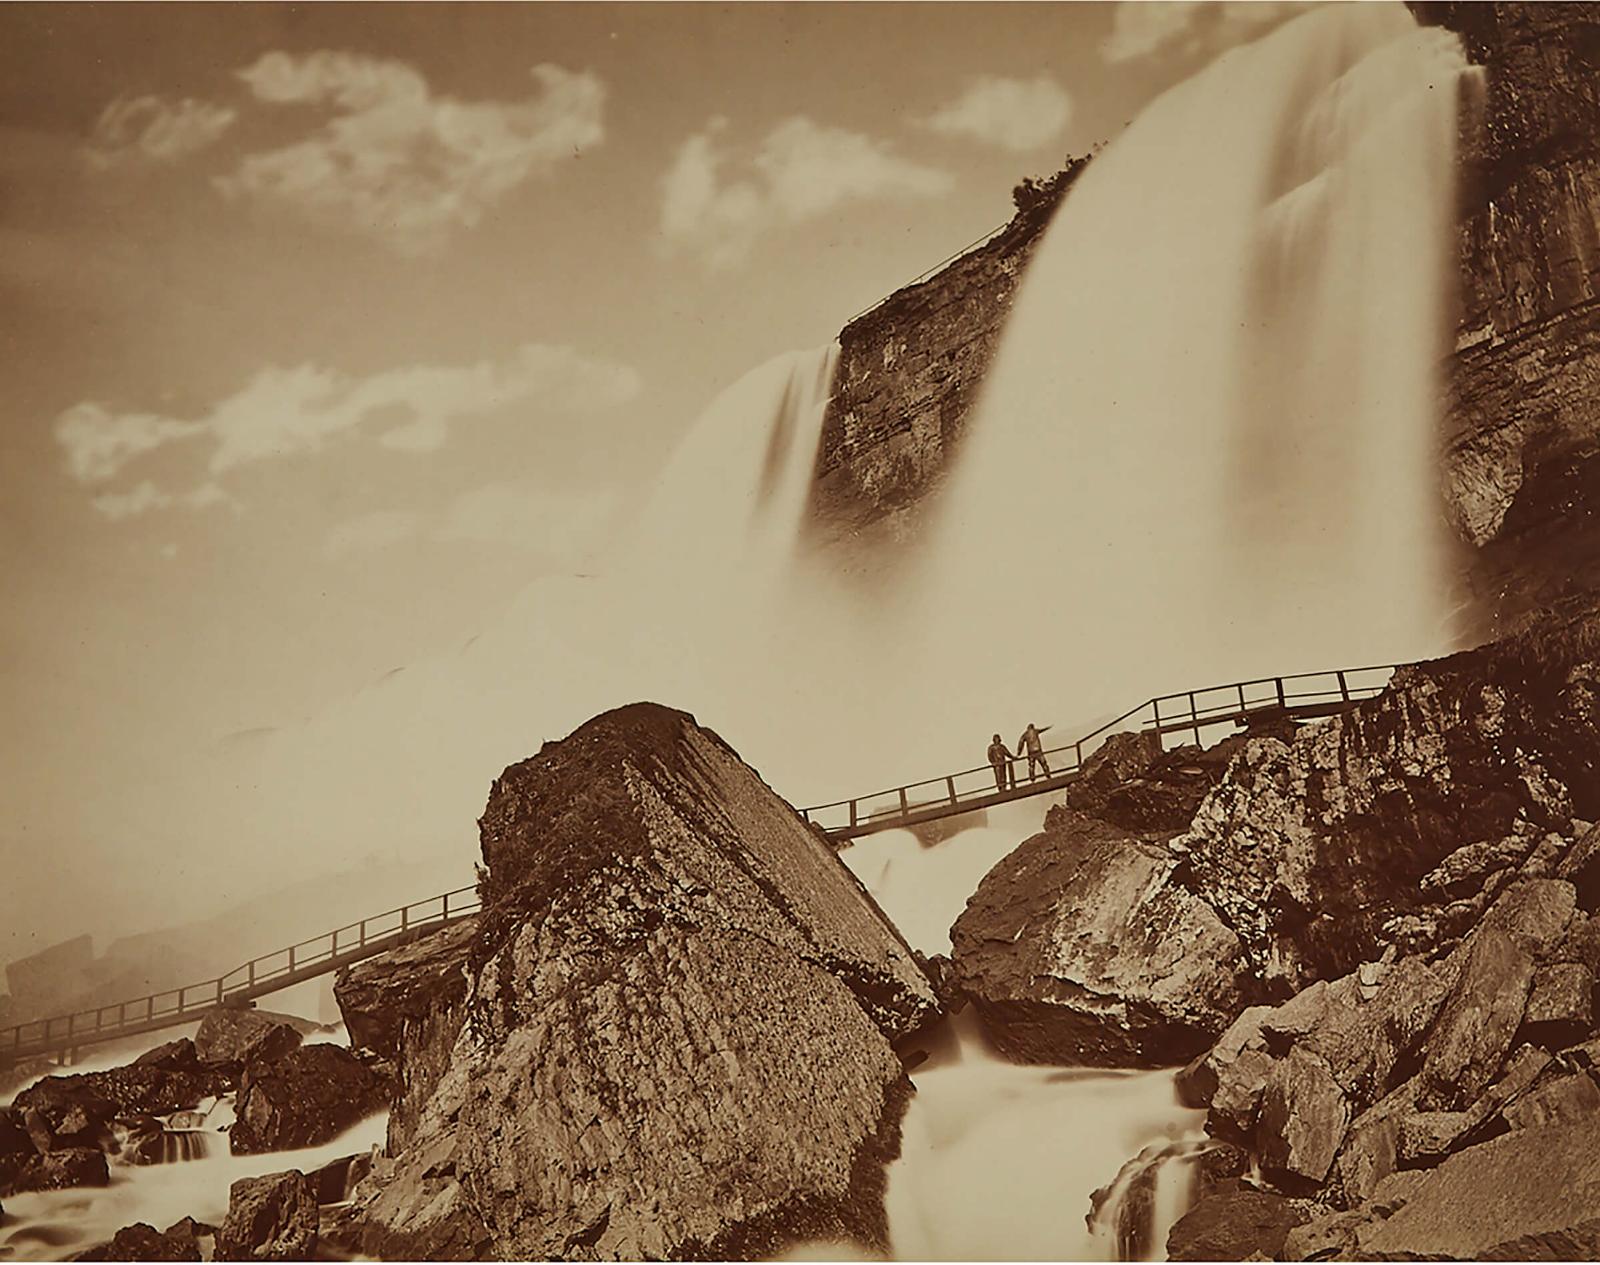 George Barker (1844-1894) - Niagara Falls With Walkway (A View Of Cave Of The Winds With A Walkway In The Foreground, Niagara Falls, New York With Two Men Standing), Circa 1888